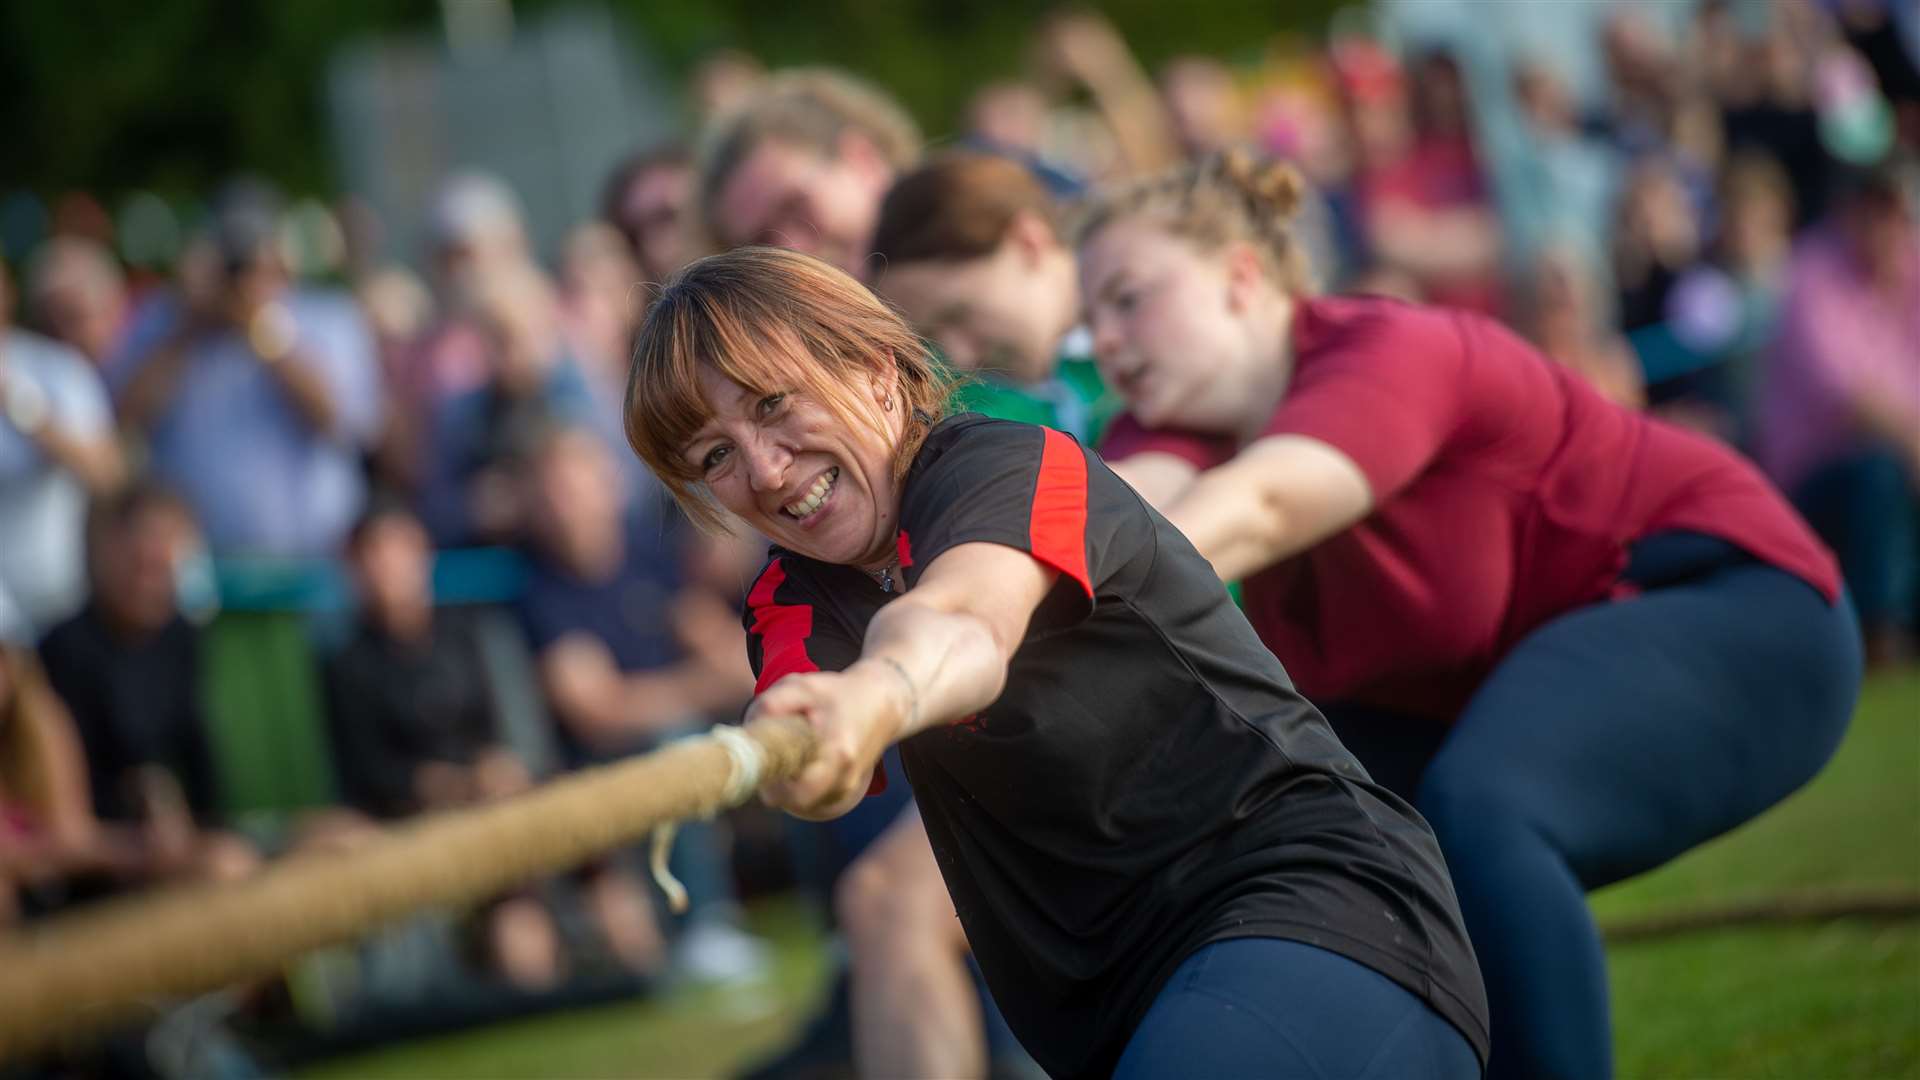 The tug of war is always hotly contested. Picture: Callum Mackay